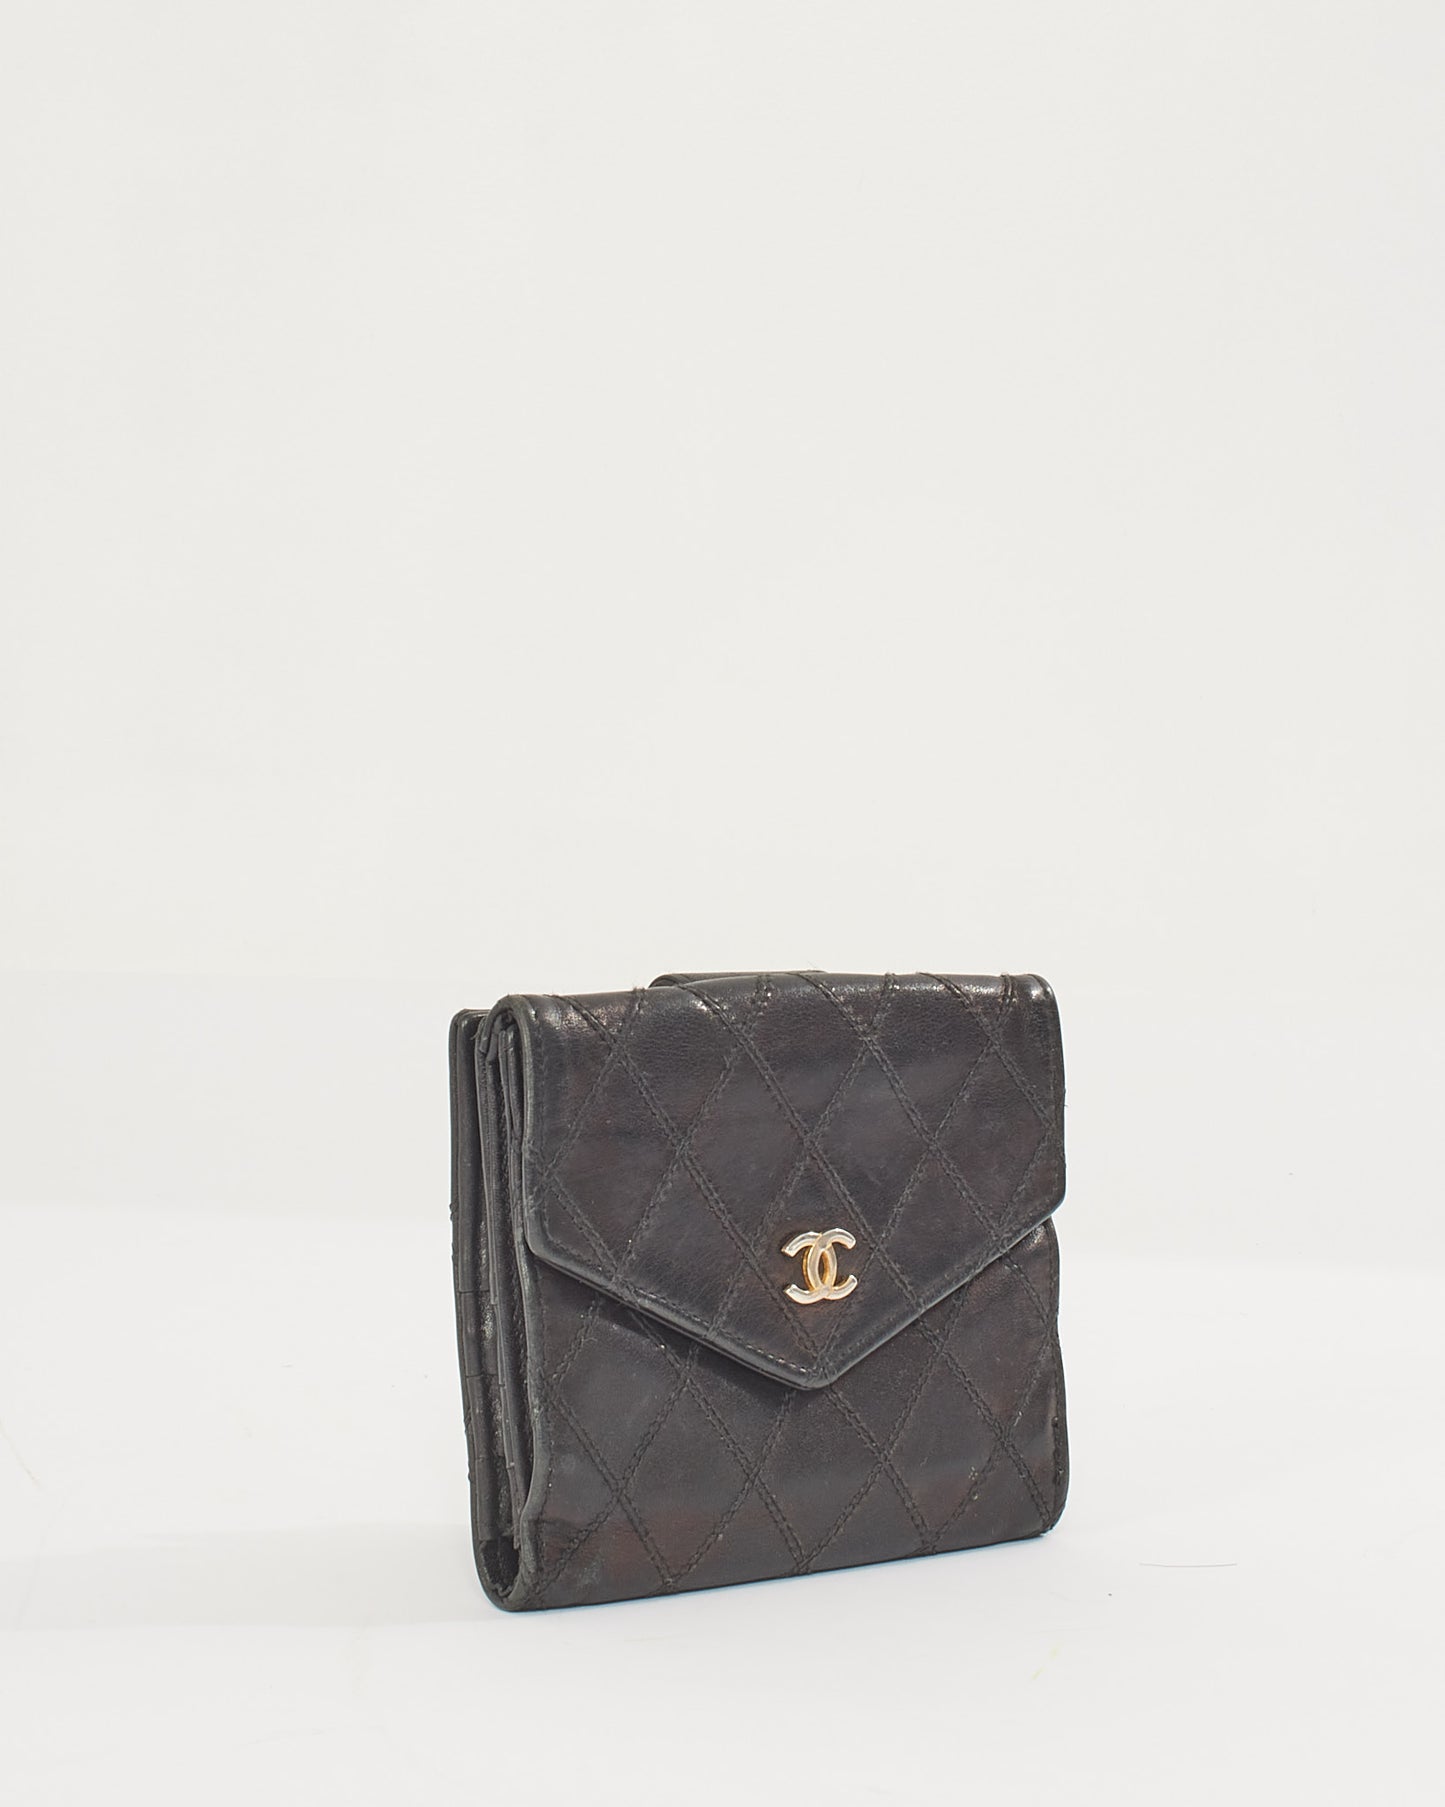 Chanel Black Lambskin Leather Square Wallet